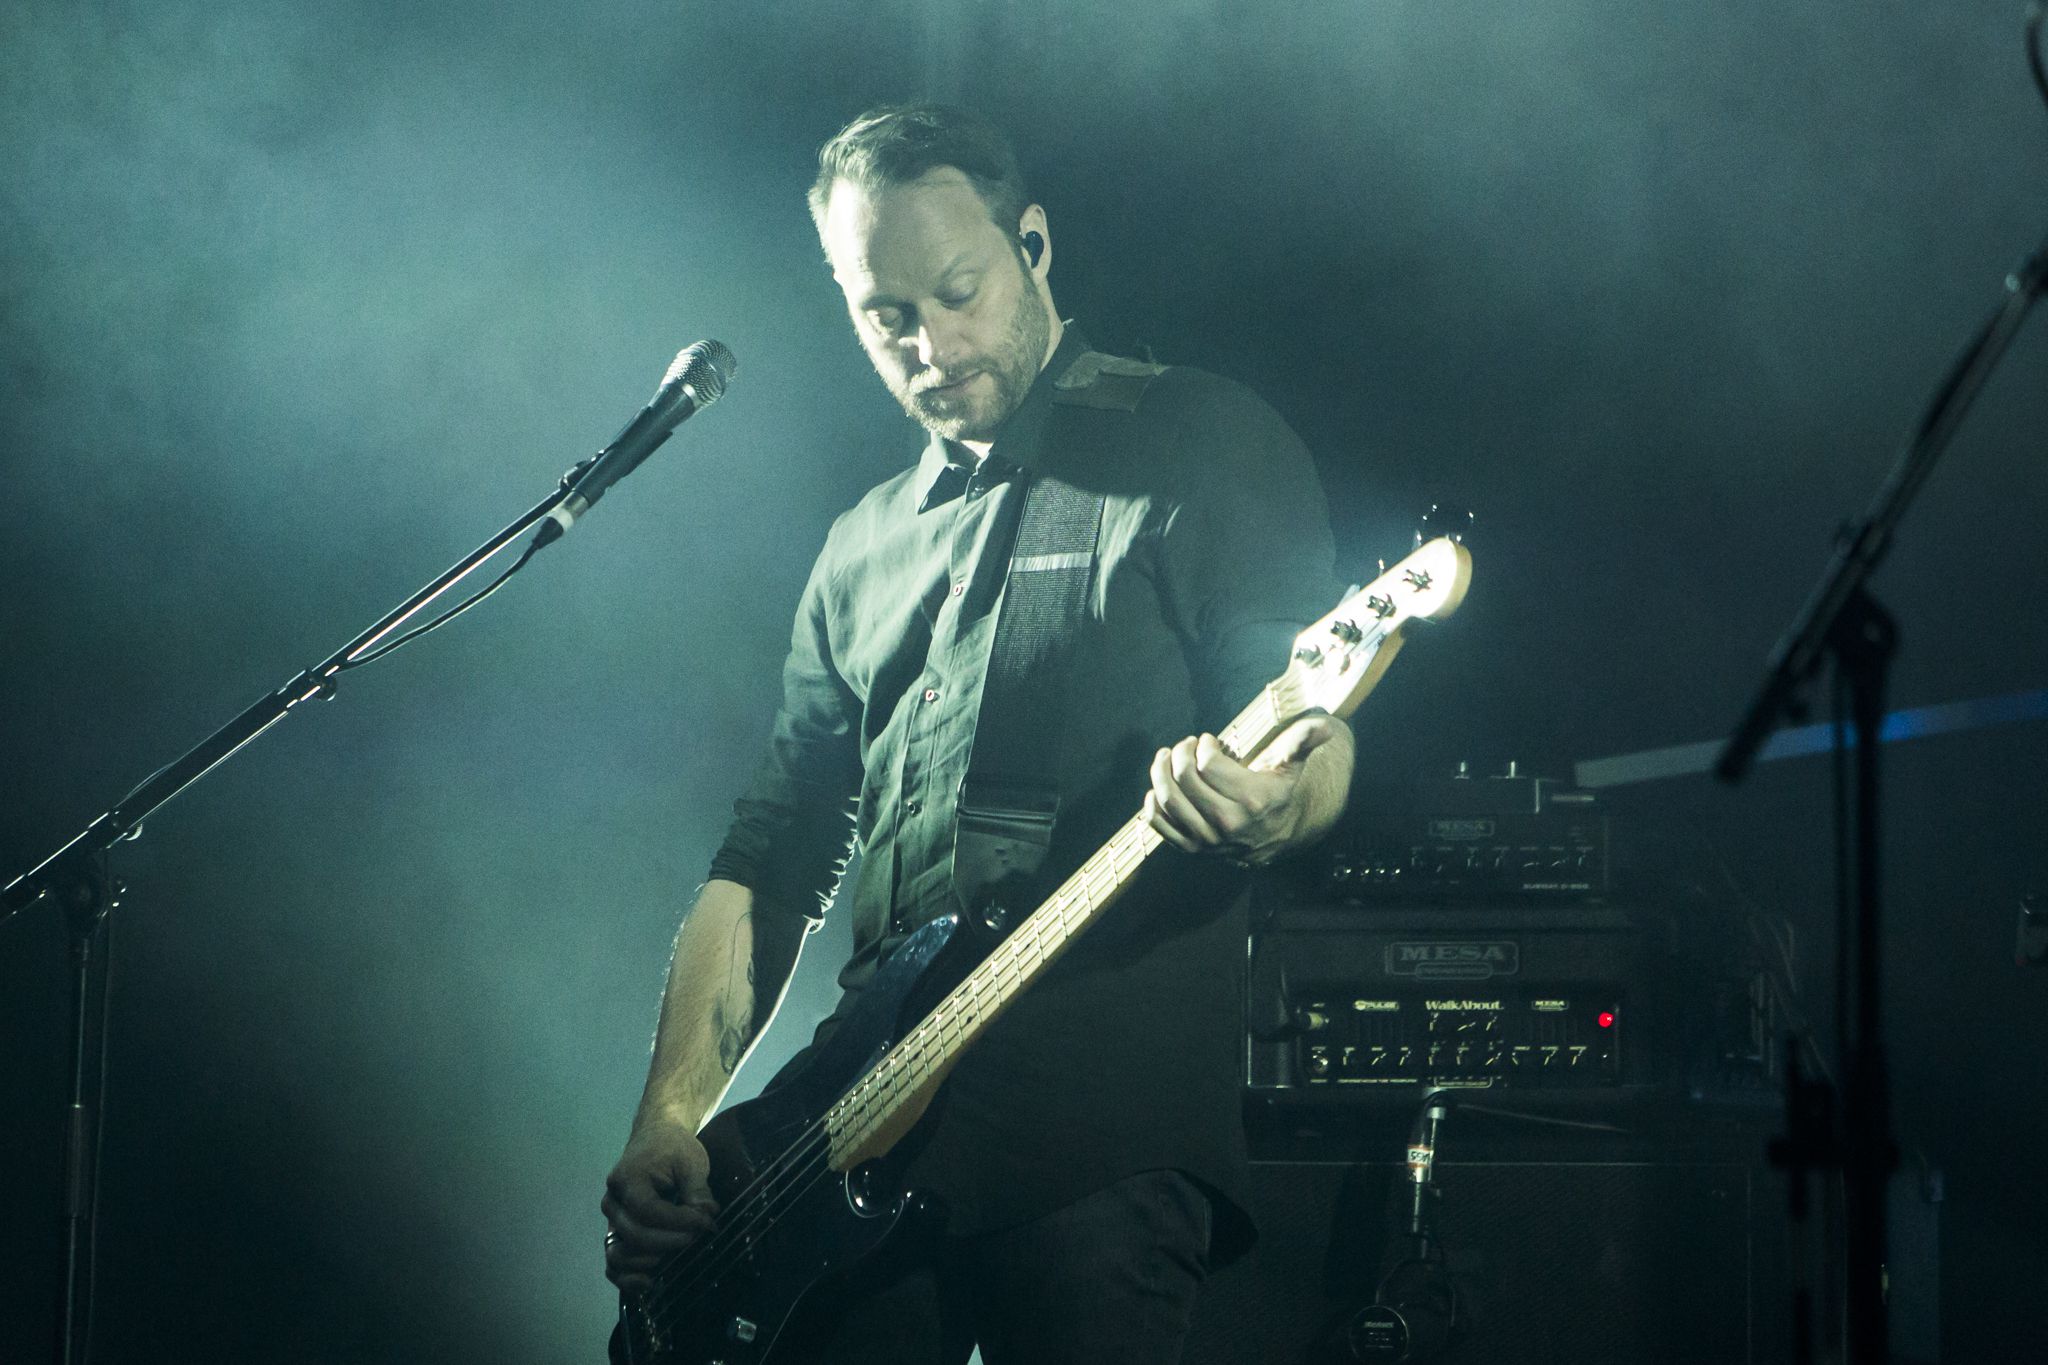 sigur ros 1 Live Review: Sigur Rós at the Fox Theater in Pomona (4/10)